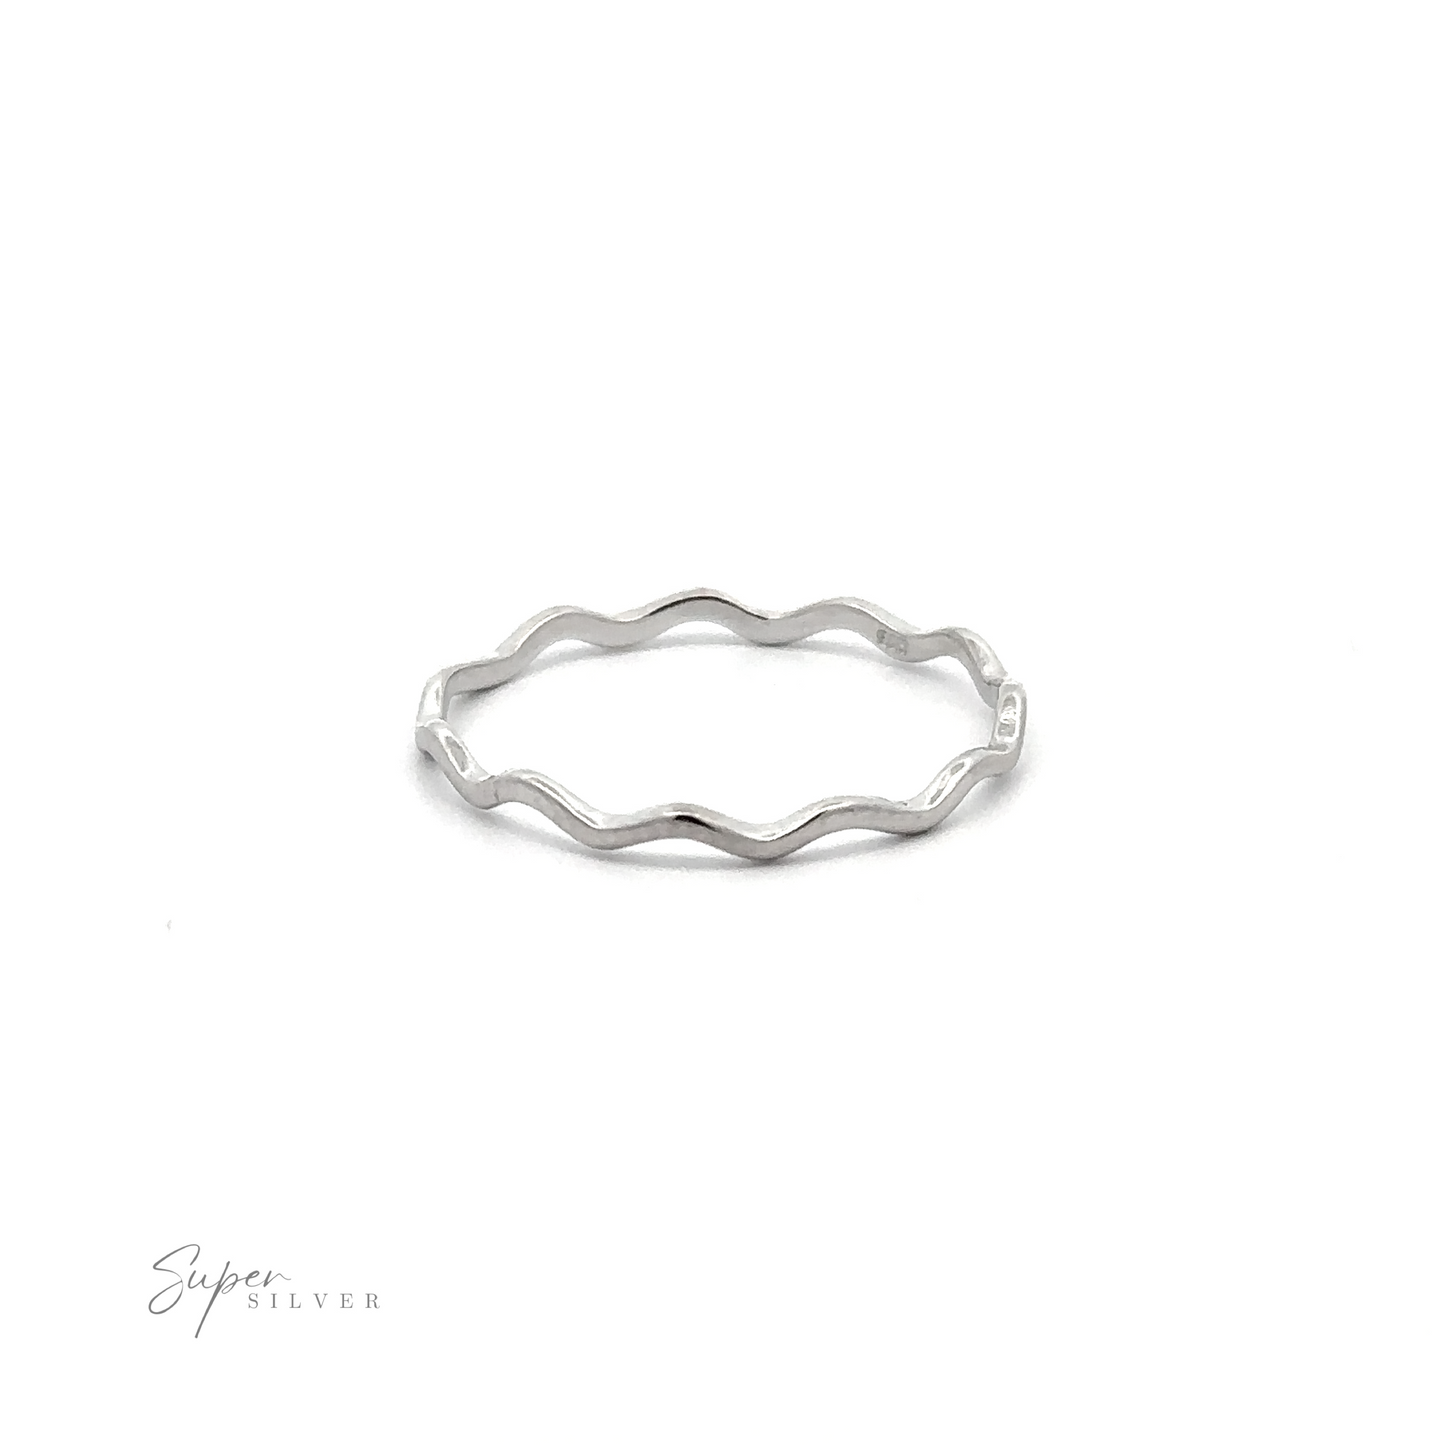 A Sterling Silver Wavy Band with a wavy pattern design.